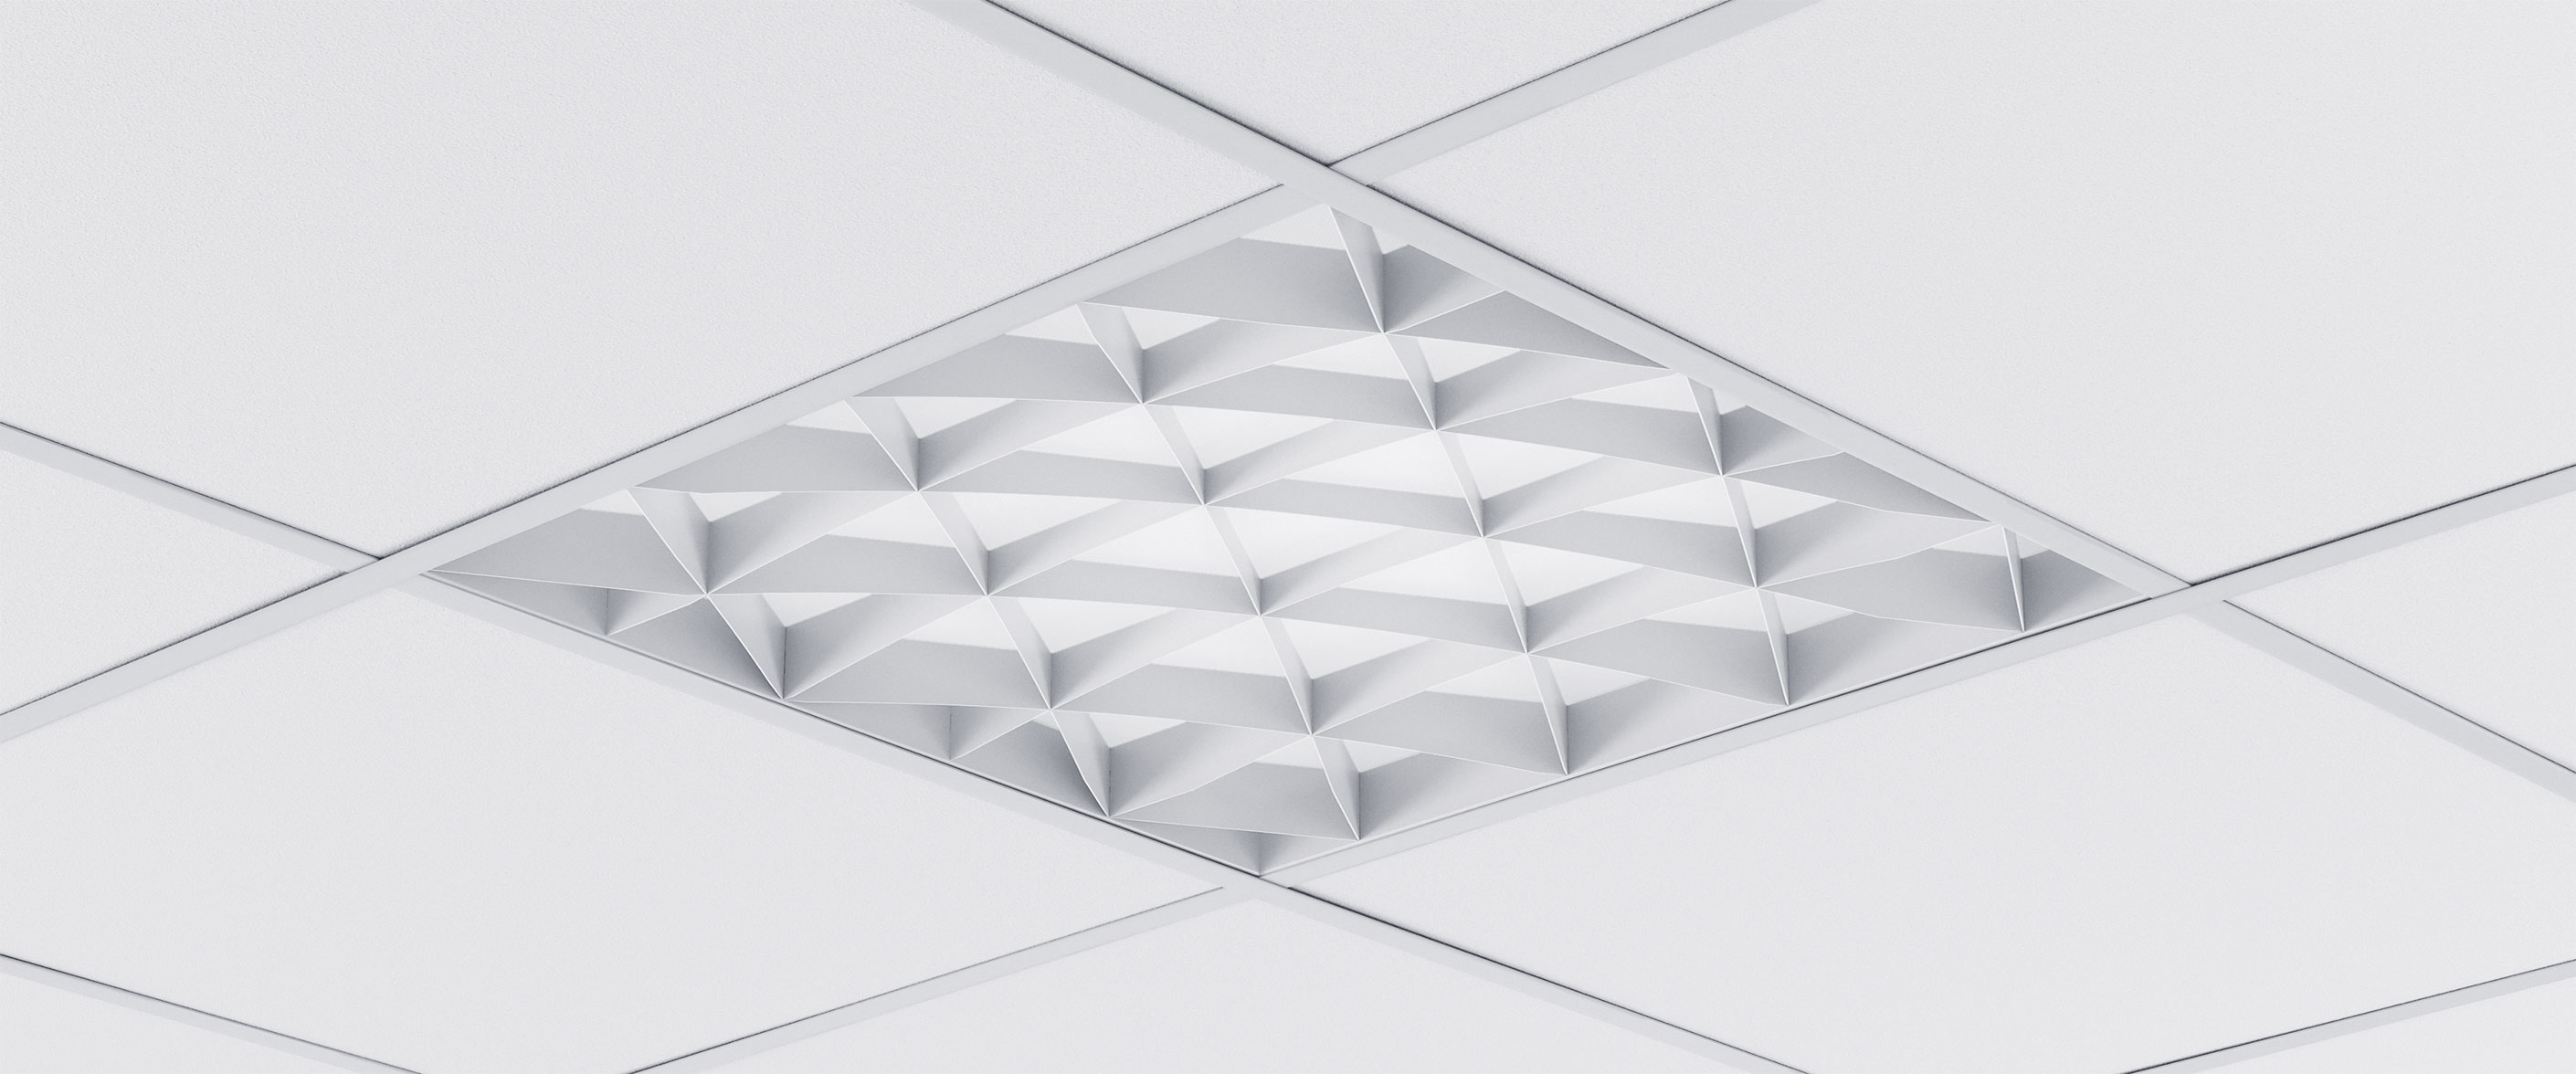 Compago - decorative accessory for recessed 600x600 luminaires. See more versions under Accessories.